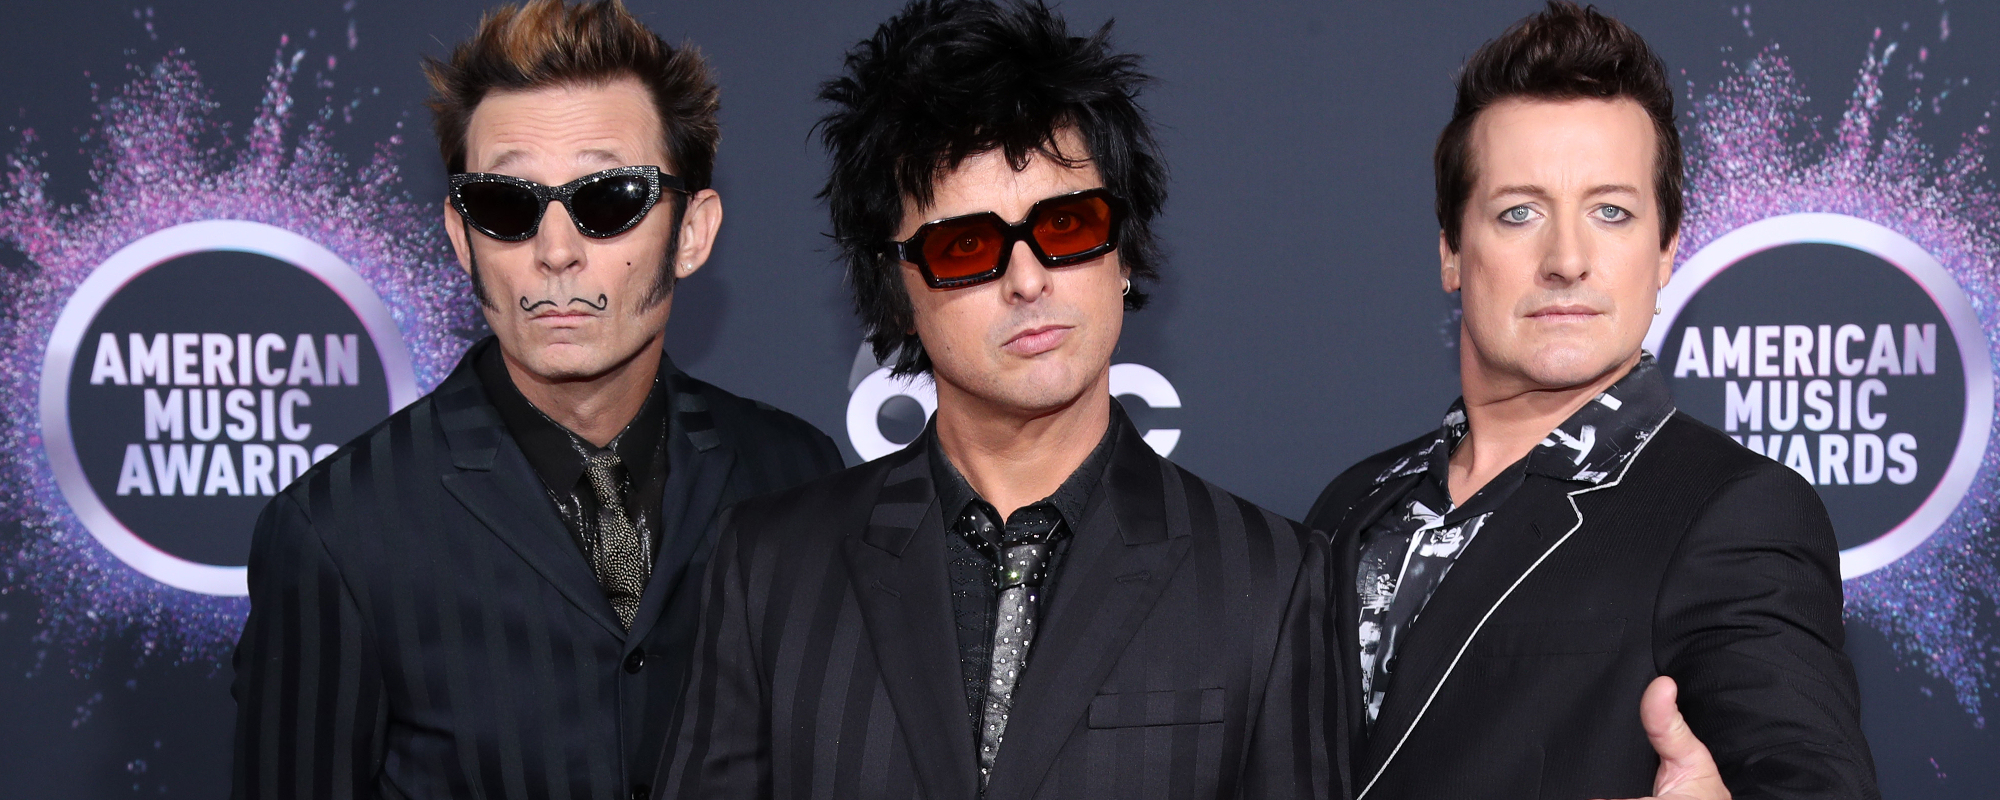 Green Day’s Billie Joe Armstrong Fires Back at Claims the Band Is “Anti-American”